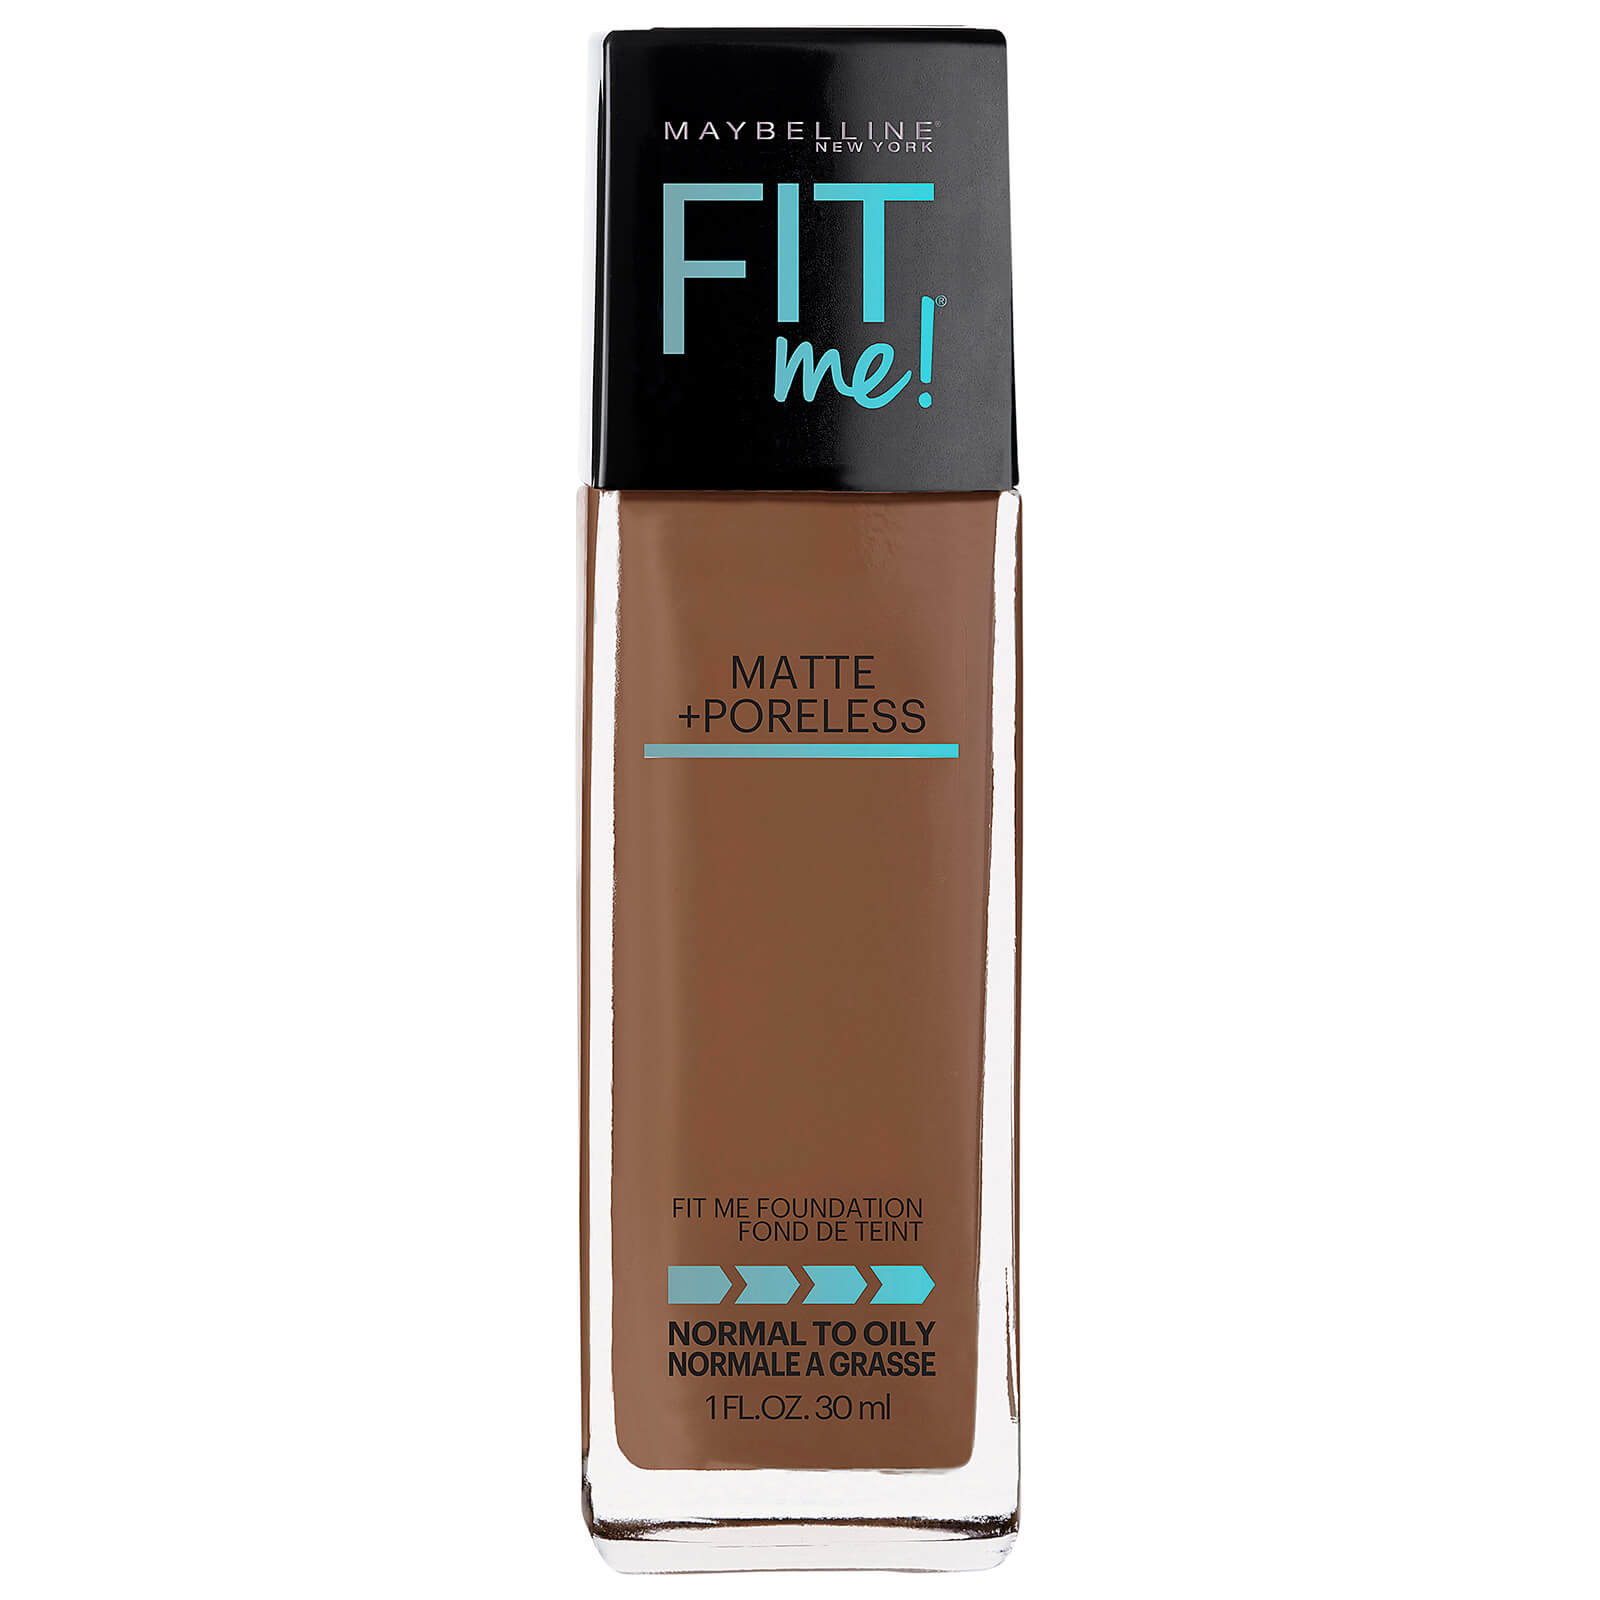 Maybelline Fit Me! Matte and Poreless Mattifying Liquid Foundation 30ml (Various Shades) - 358 Latte